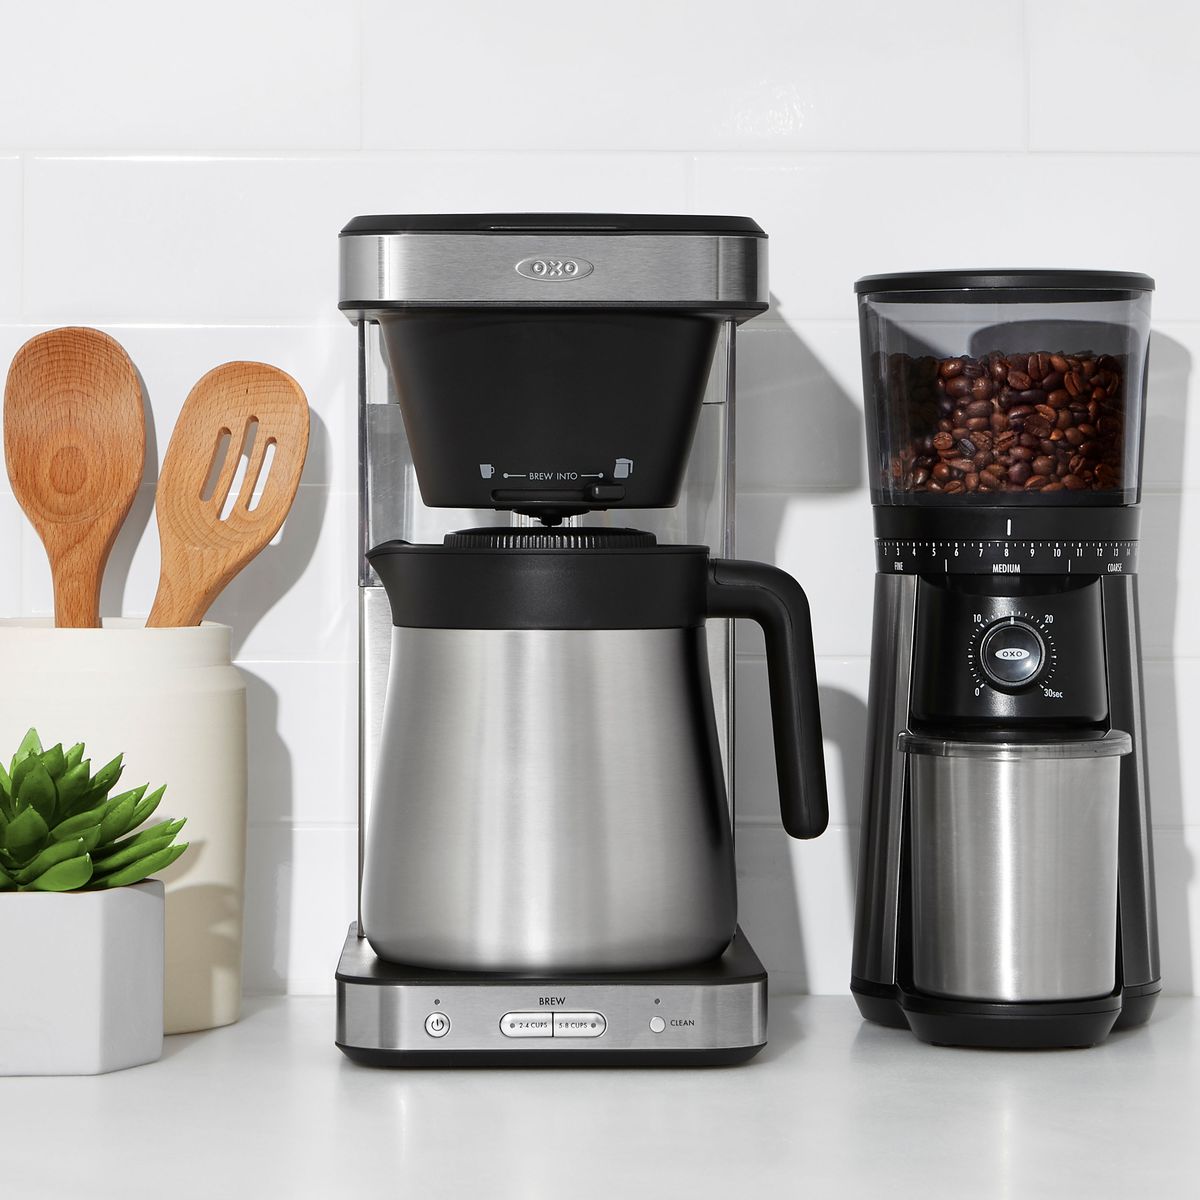 https://hips.hearstapps.com/hmg-prod.s3.amazonaws.com/images/8718800-oxo-brew-8-cup-coffee-maker-ls-with-grinder-1597174435.jpg?crop=1.00xw:1.00xh;0,0&resize=1200:*